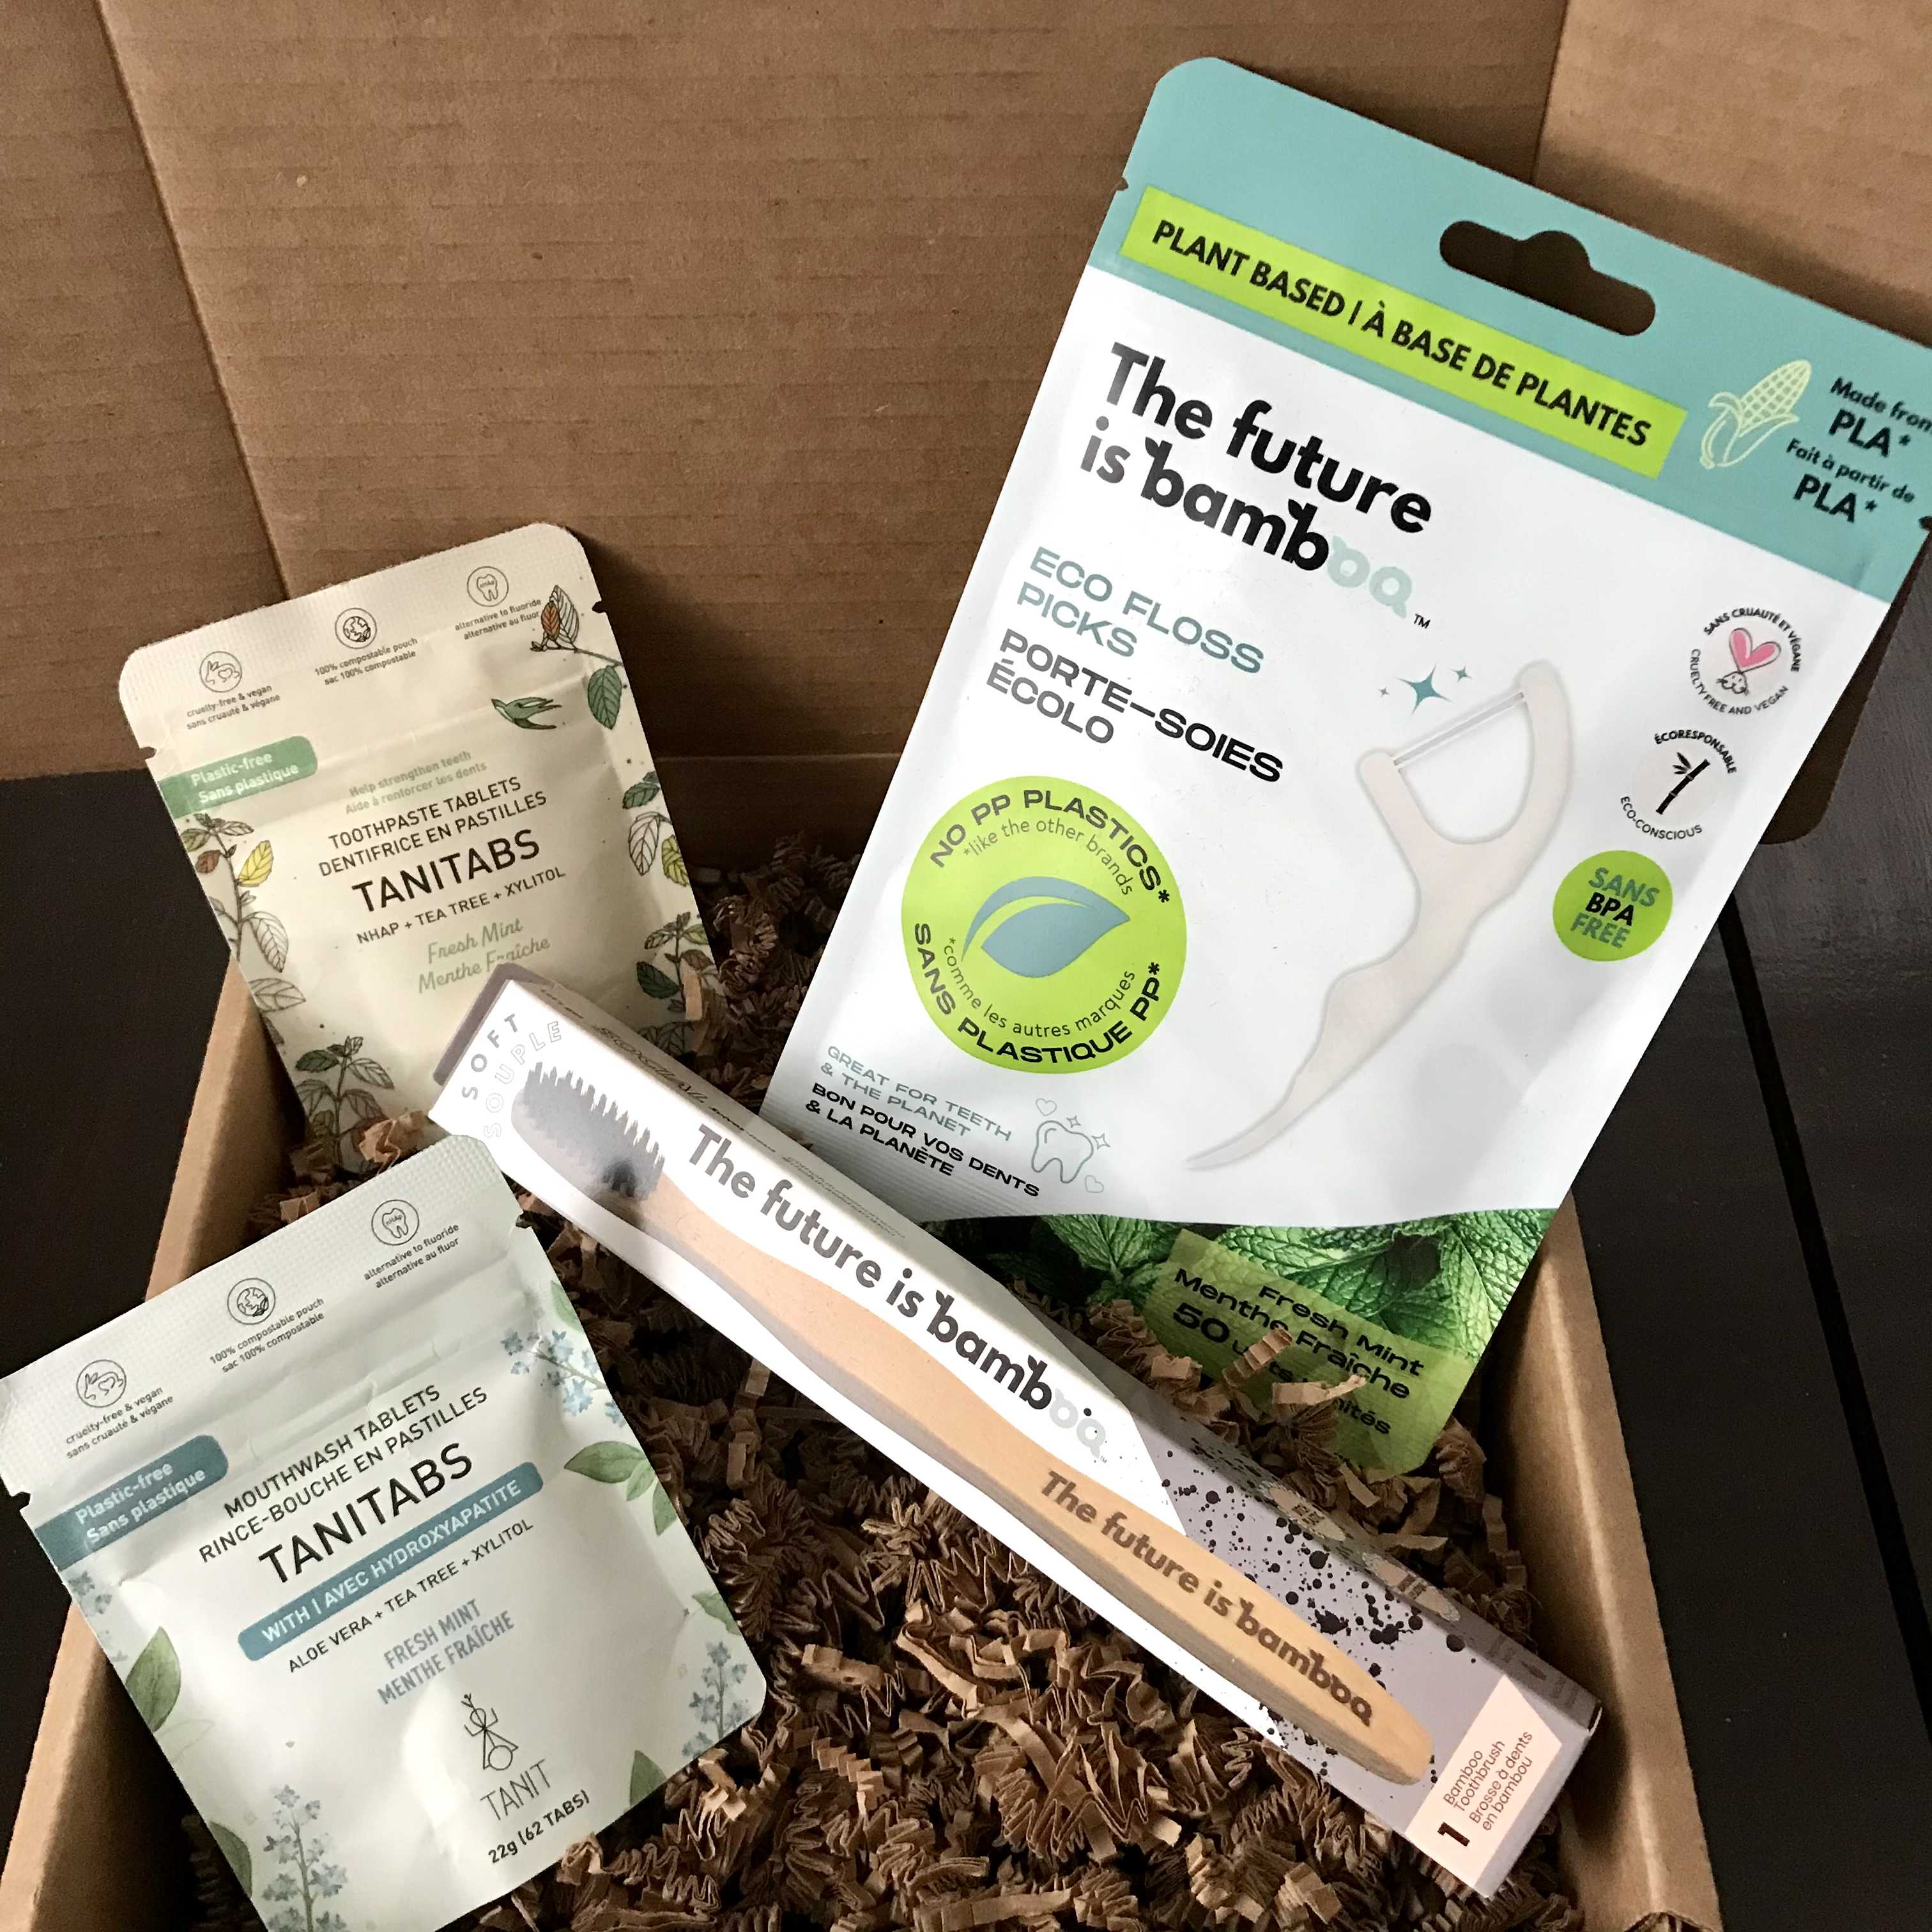 Introducing the Tanit Oral Care Kit – your gateway to sustainable and eco-friendly dental hygiene. This thoughtfully curated kit brings together four essential dental care items from renowned Canadian brands Tanit Botanics and The Future is Bamboo, ensuring a zero-waste approach to oral health.